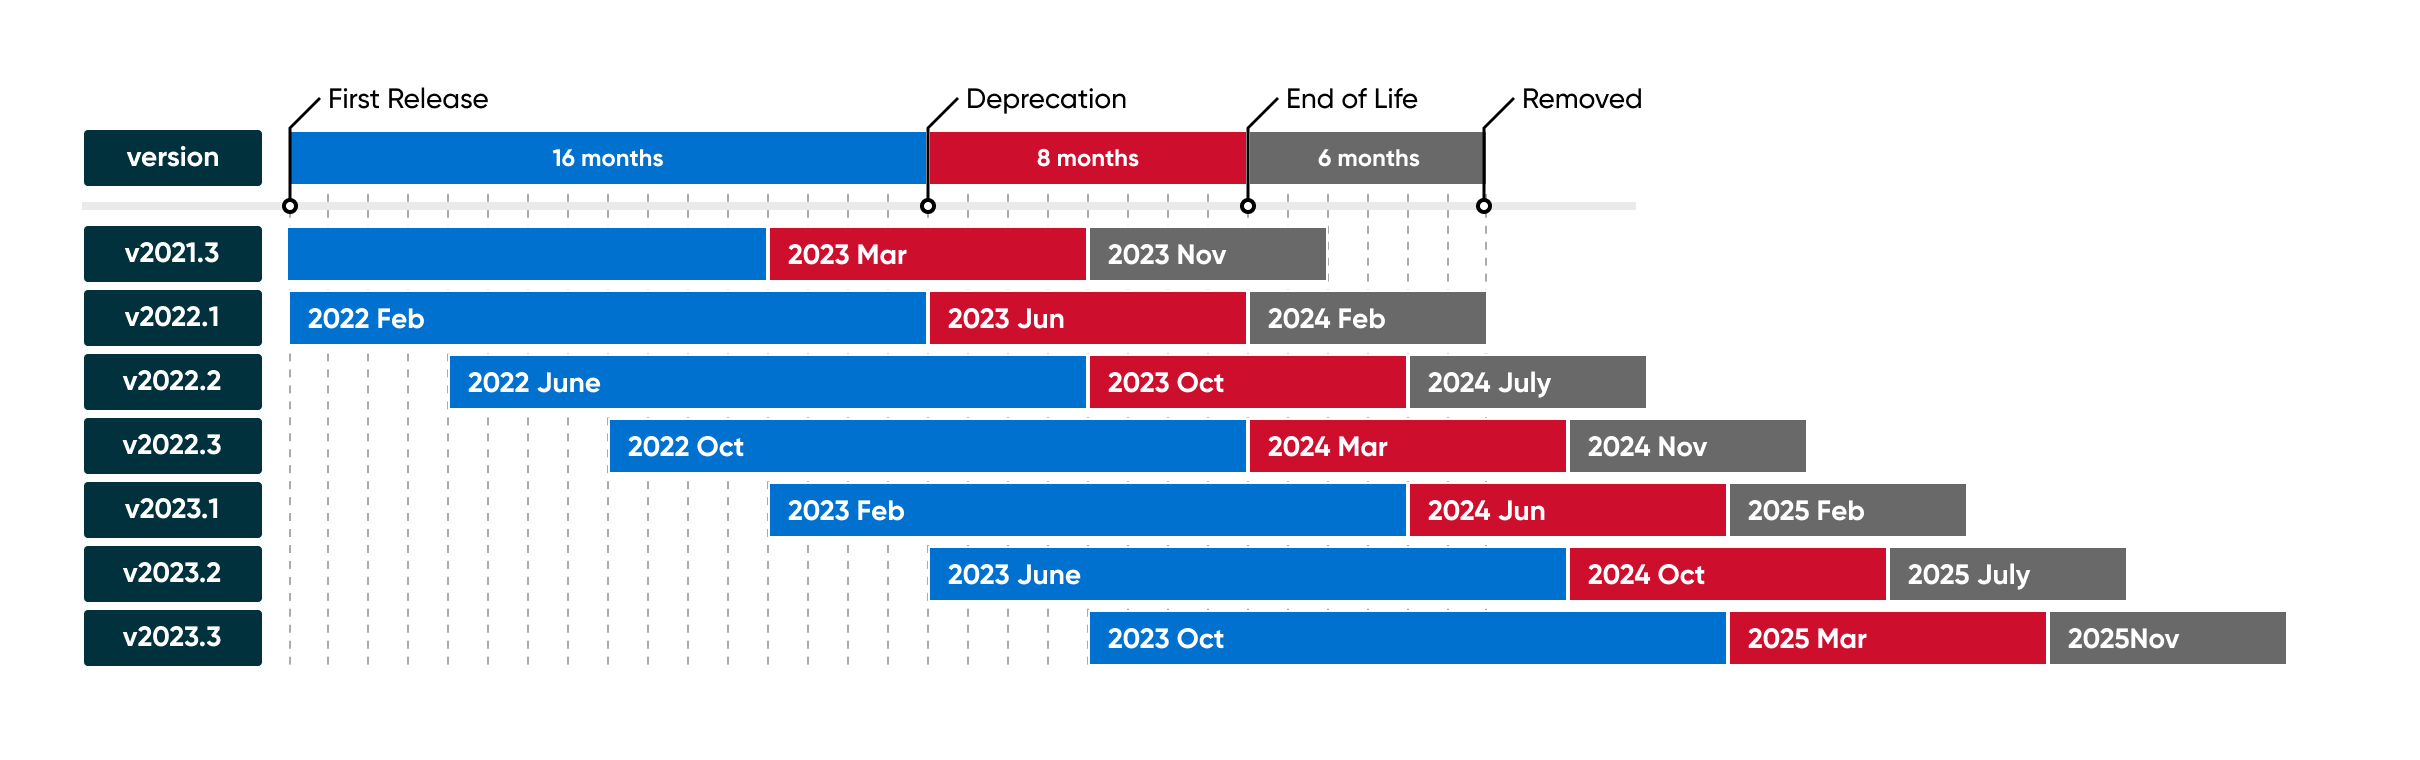 LTS Lifecycle Chart – to v2023.3.LTS.png